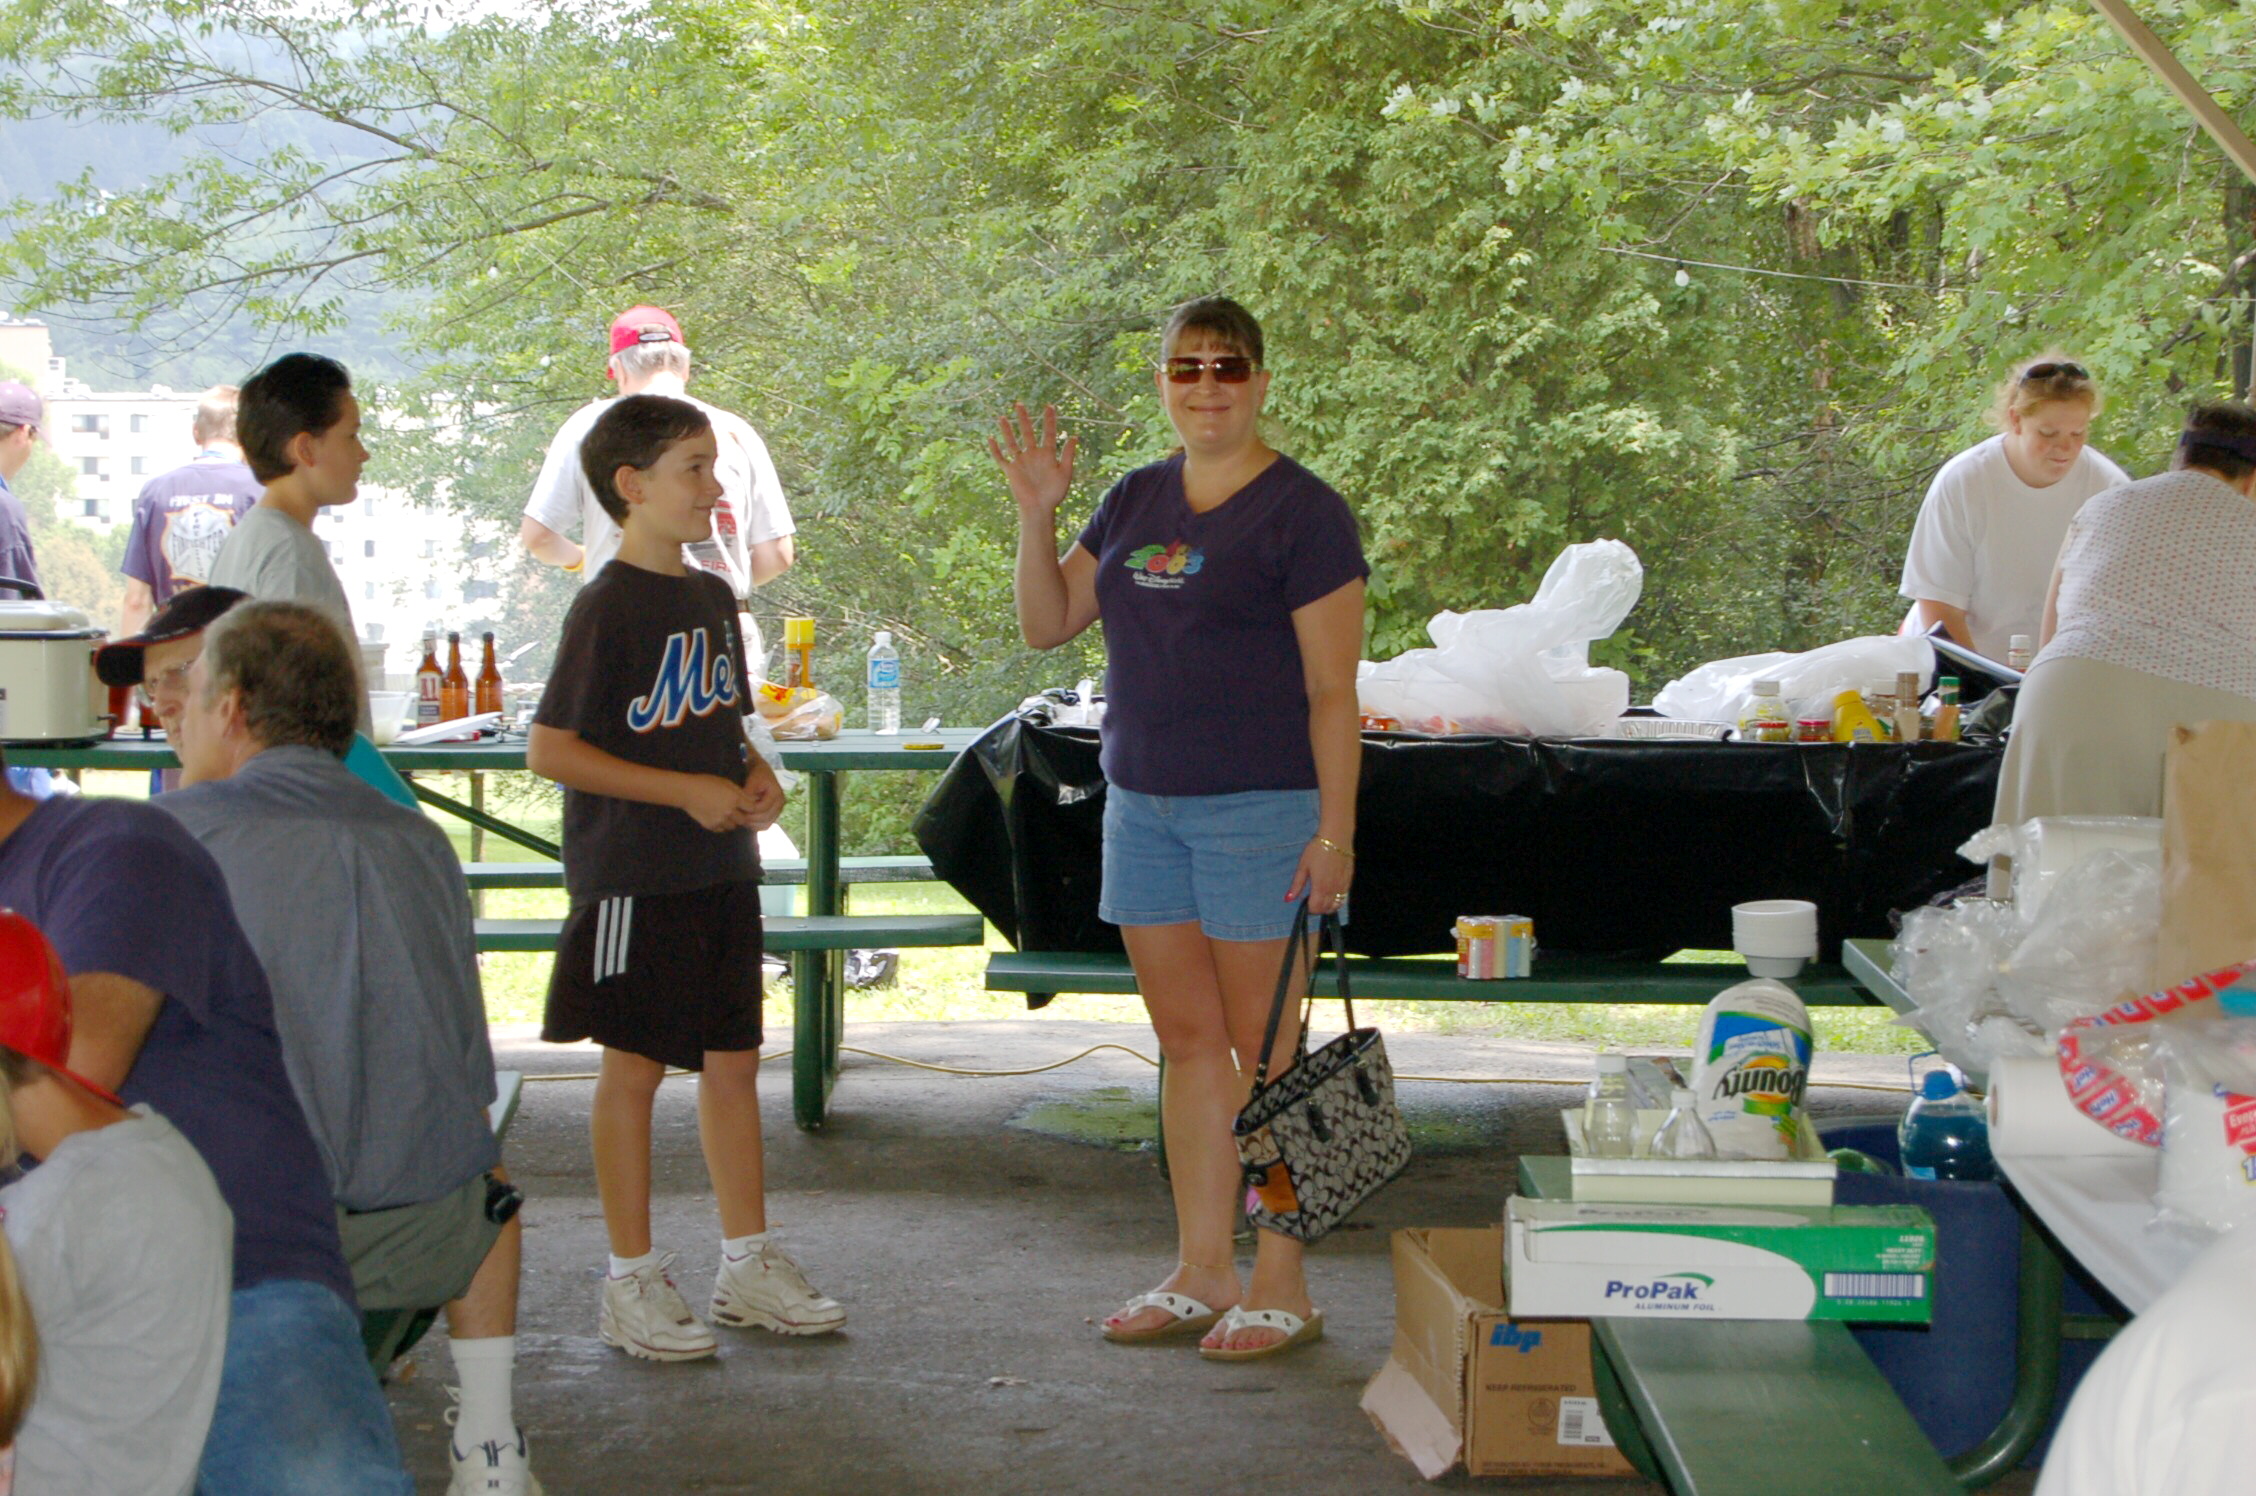 07-30-06  Other - Company Picnic